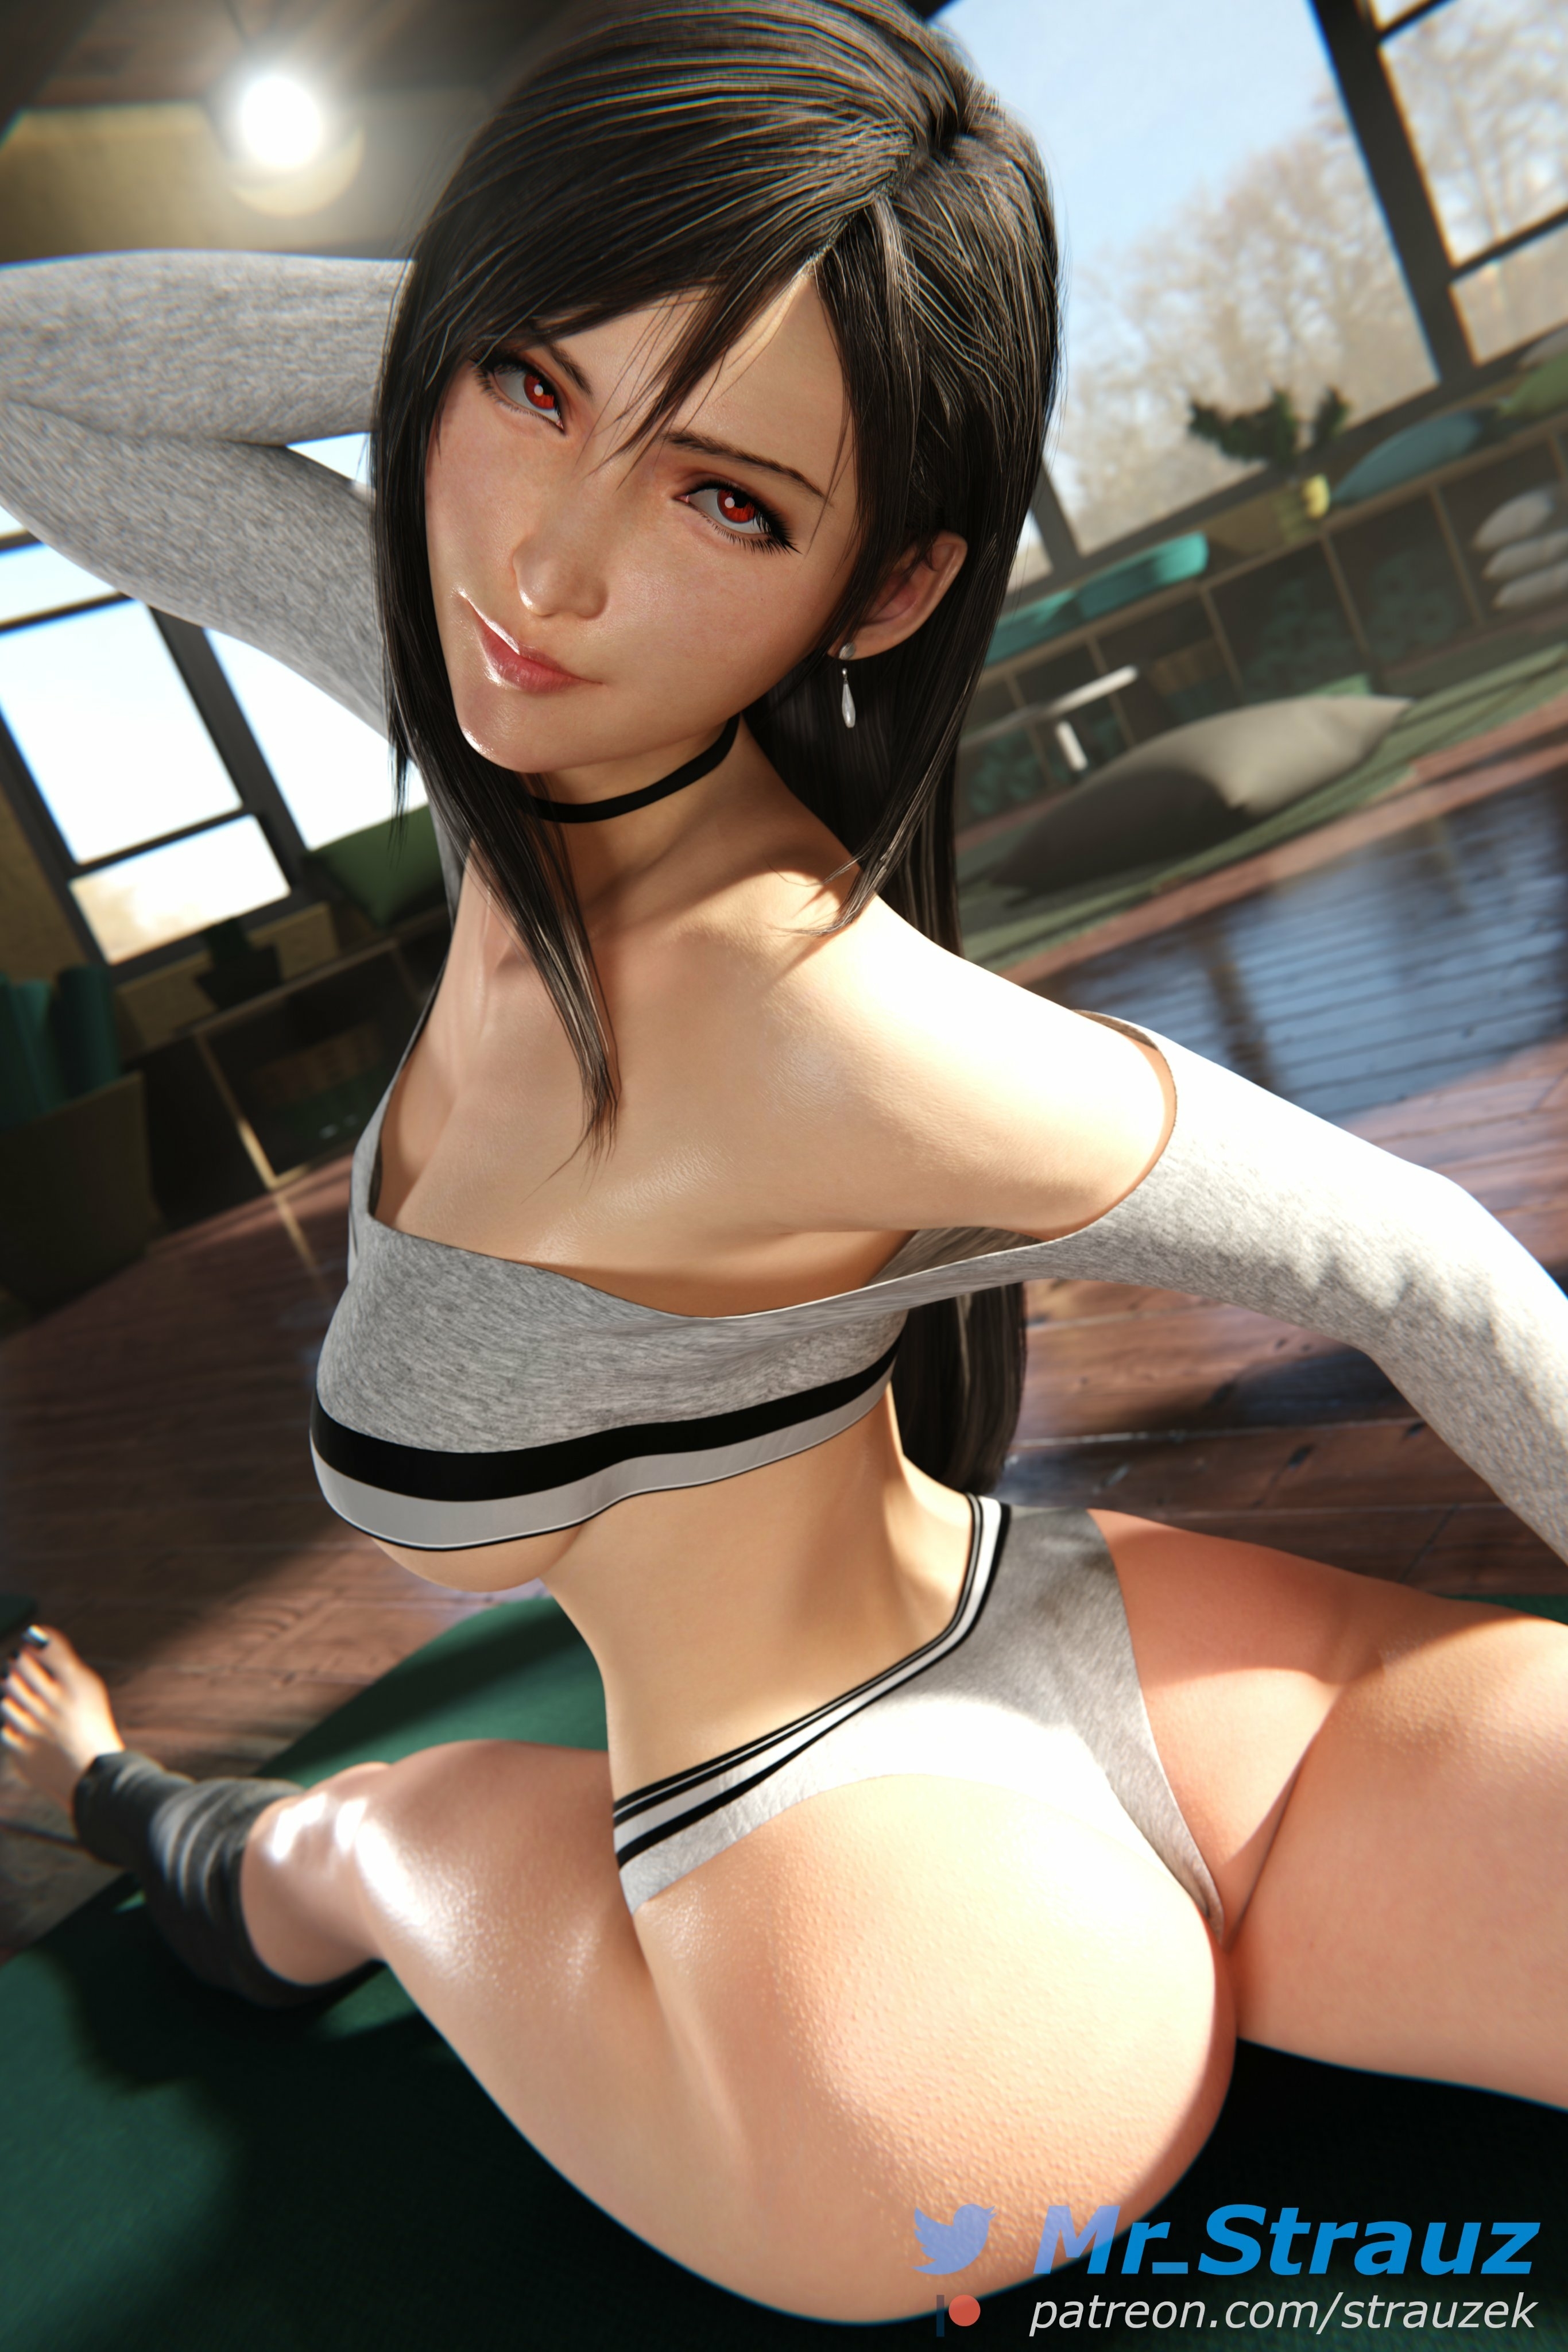 Yoga session with Tifa (Part -1 and 2) Tifa Lockhart Final Fantasy 7 3dnsfw Big Ass Big Tits Nude Clean Pussy Yoga Partially_clothed Stretching 9